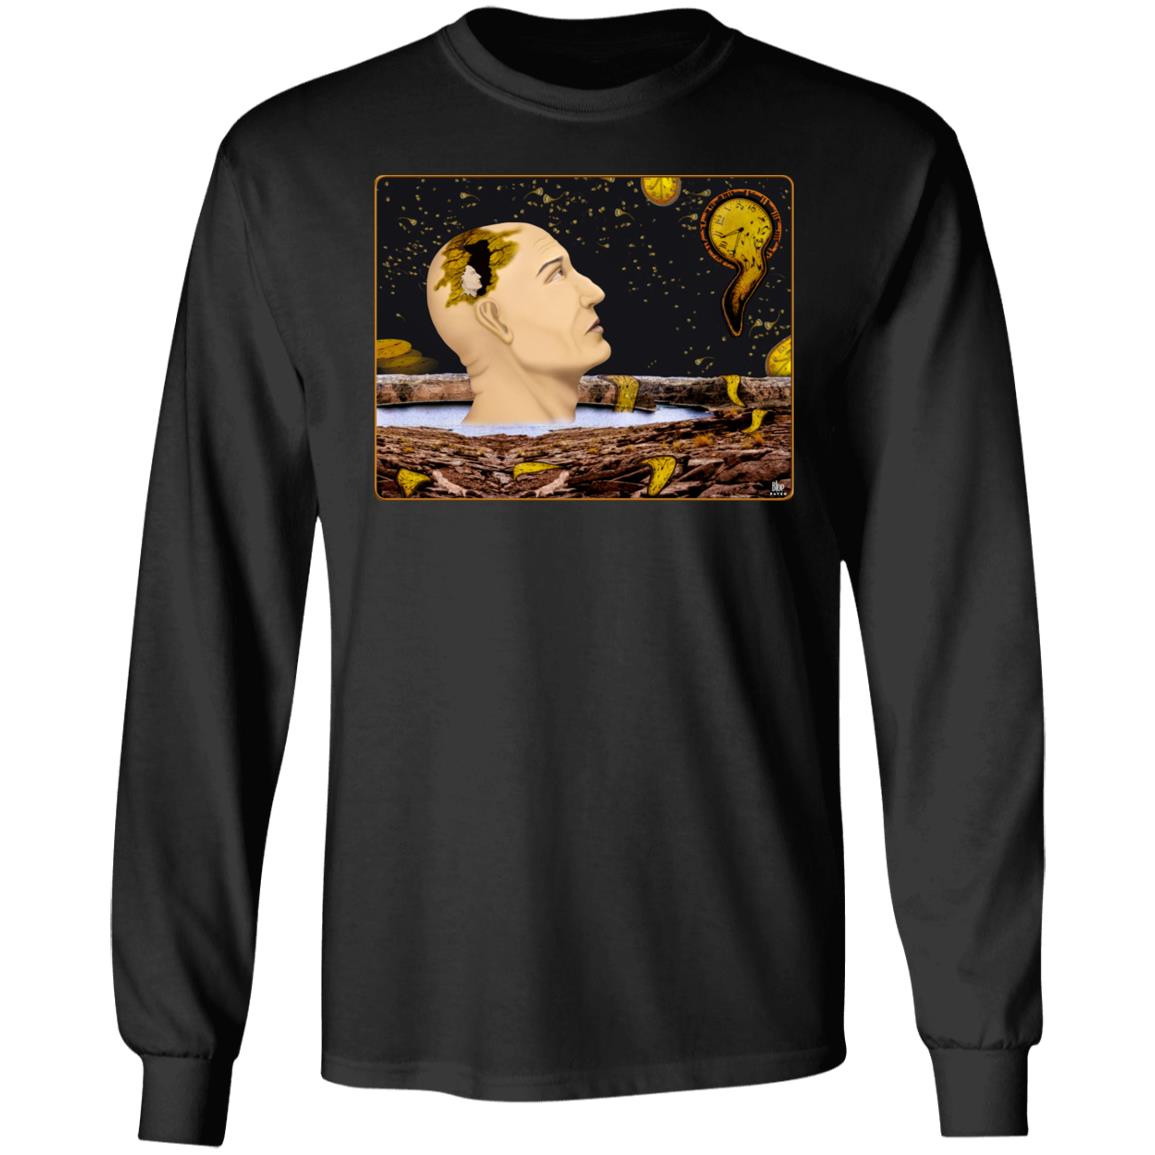 Earth Time Running Out – Men’s Long Sleeve T-Shirt